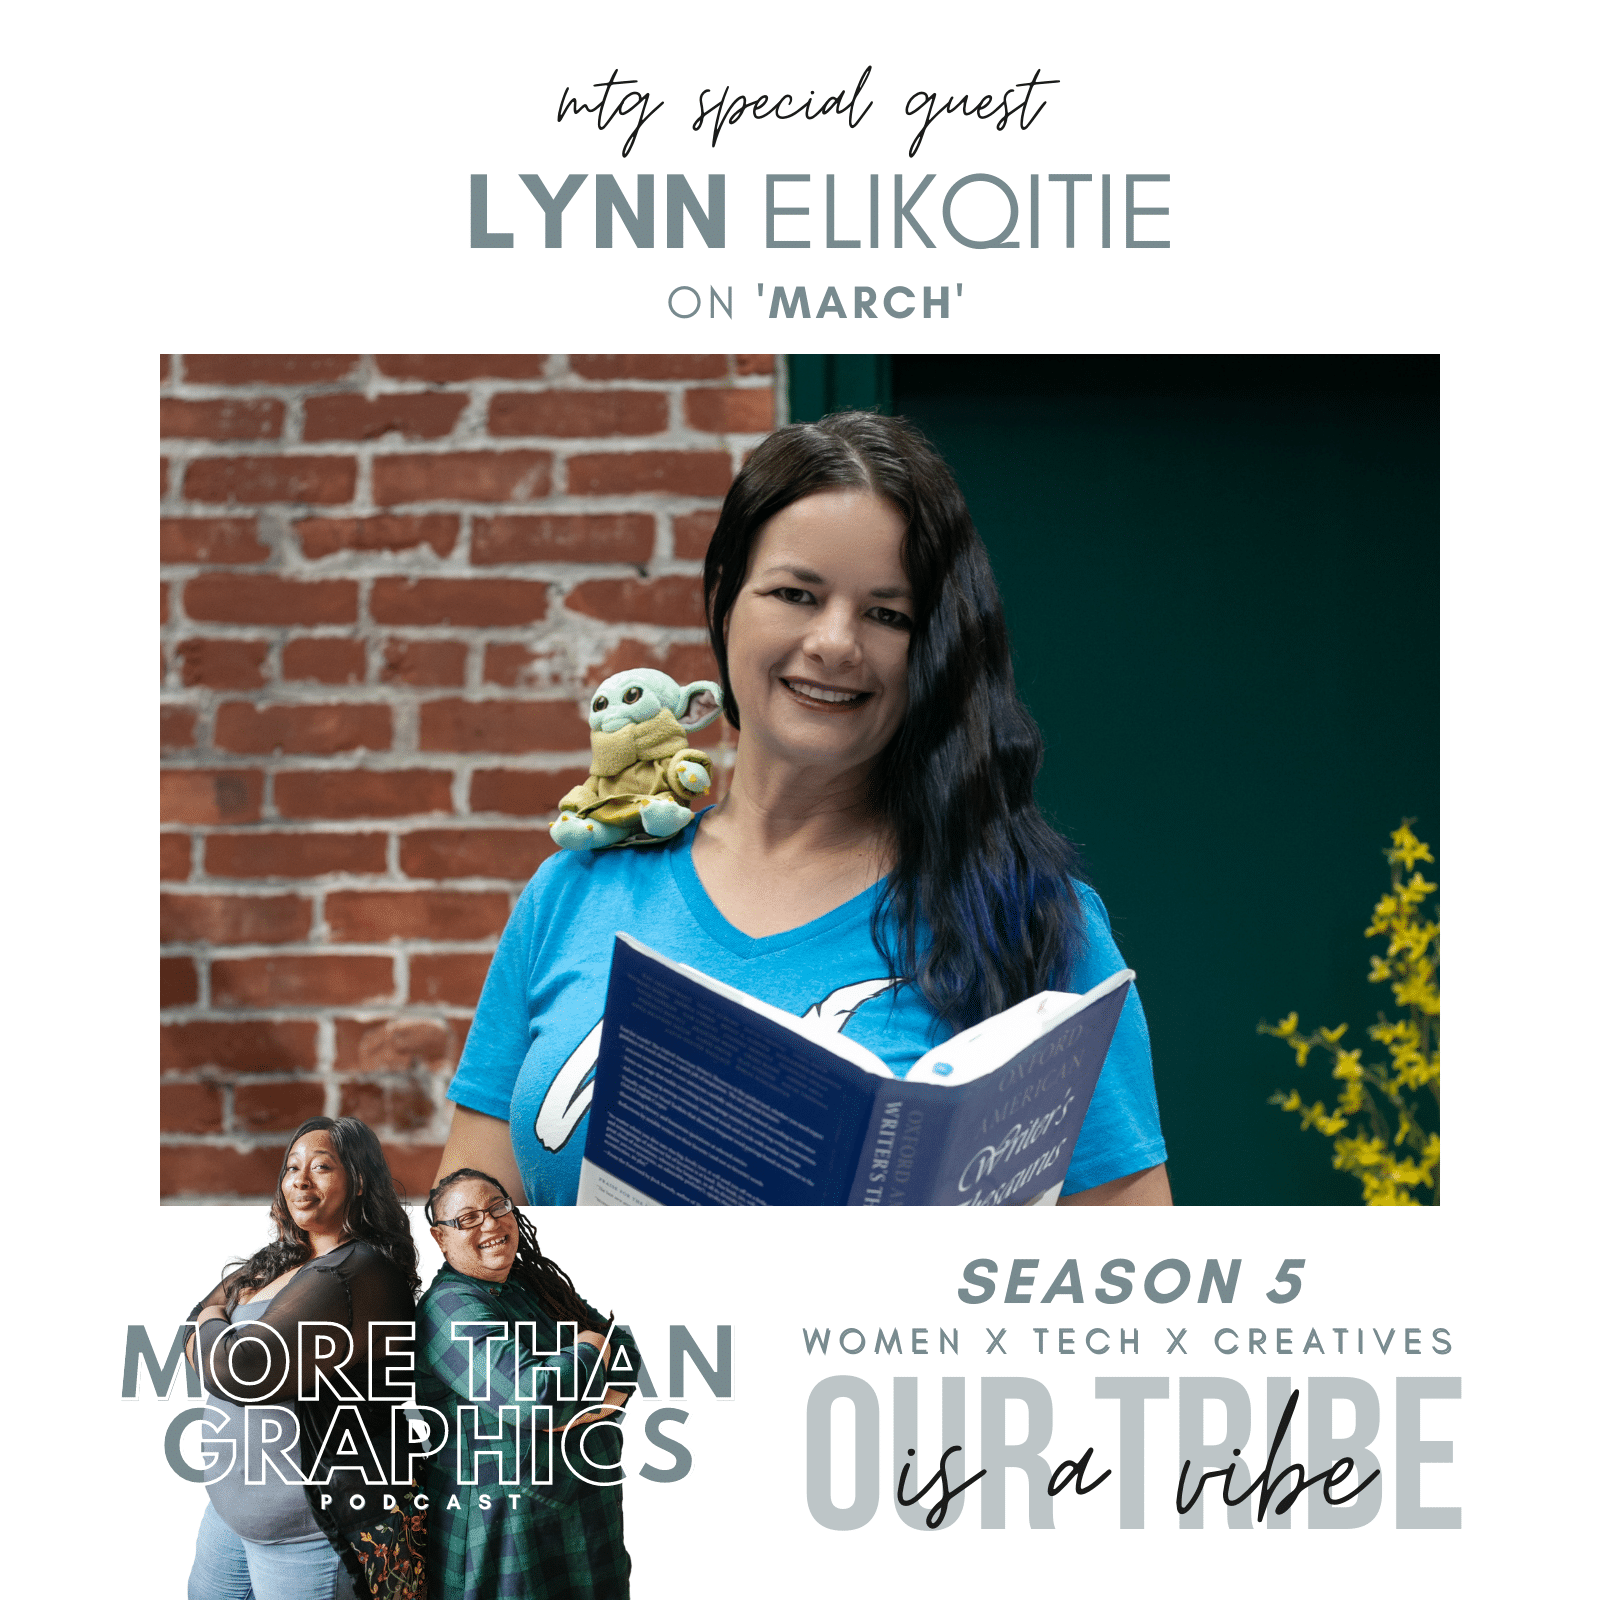 MTG welcomes special guest Lynn “Elikqitie” Smargis